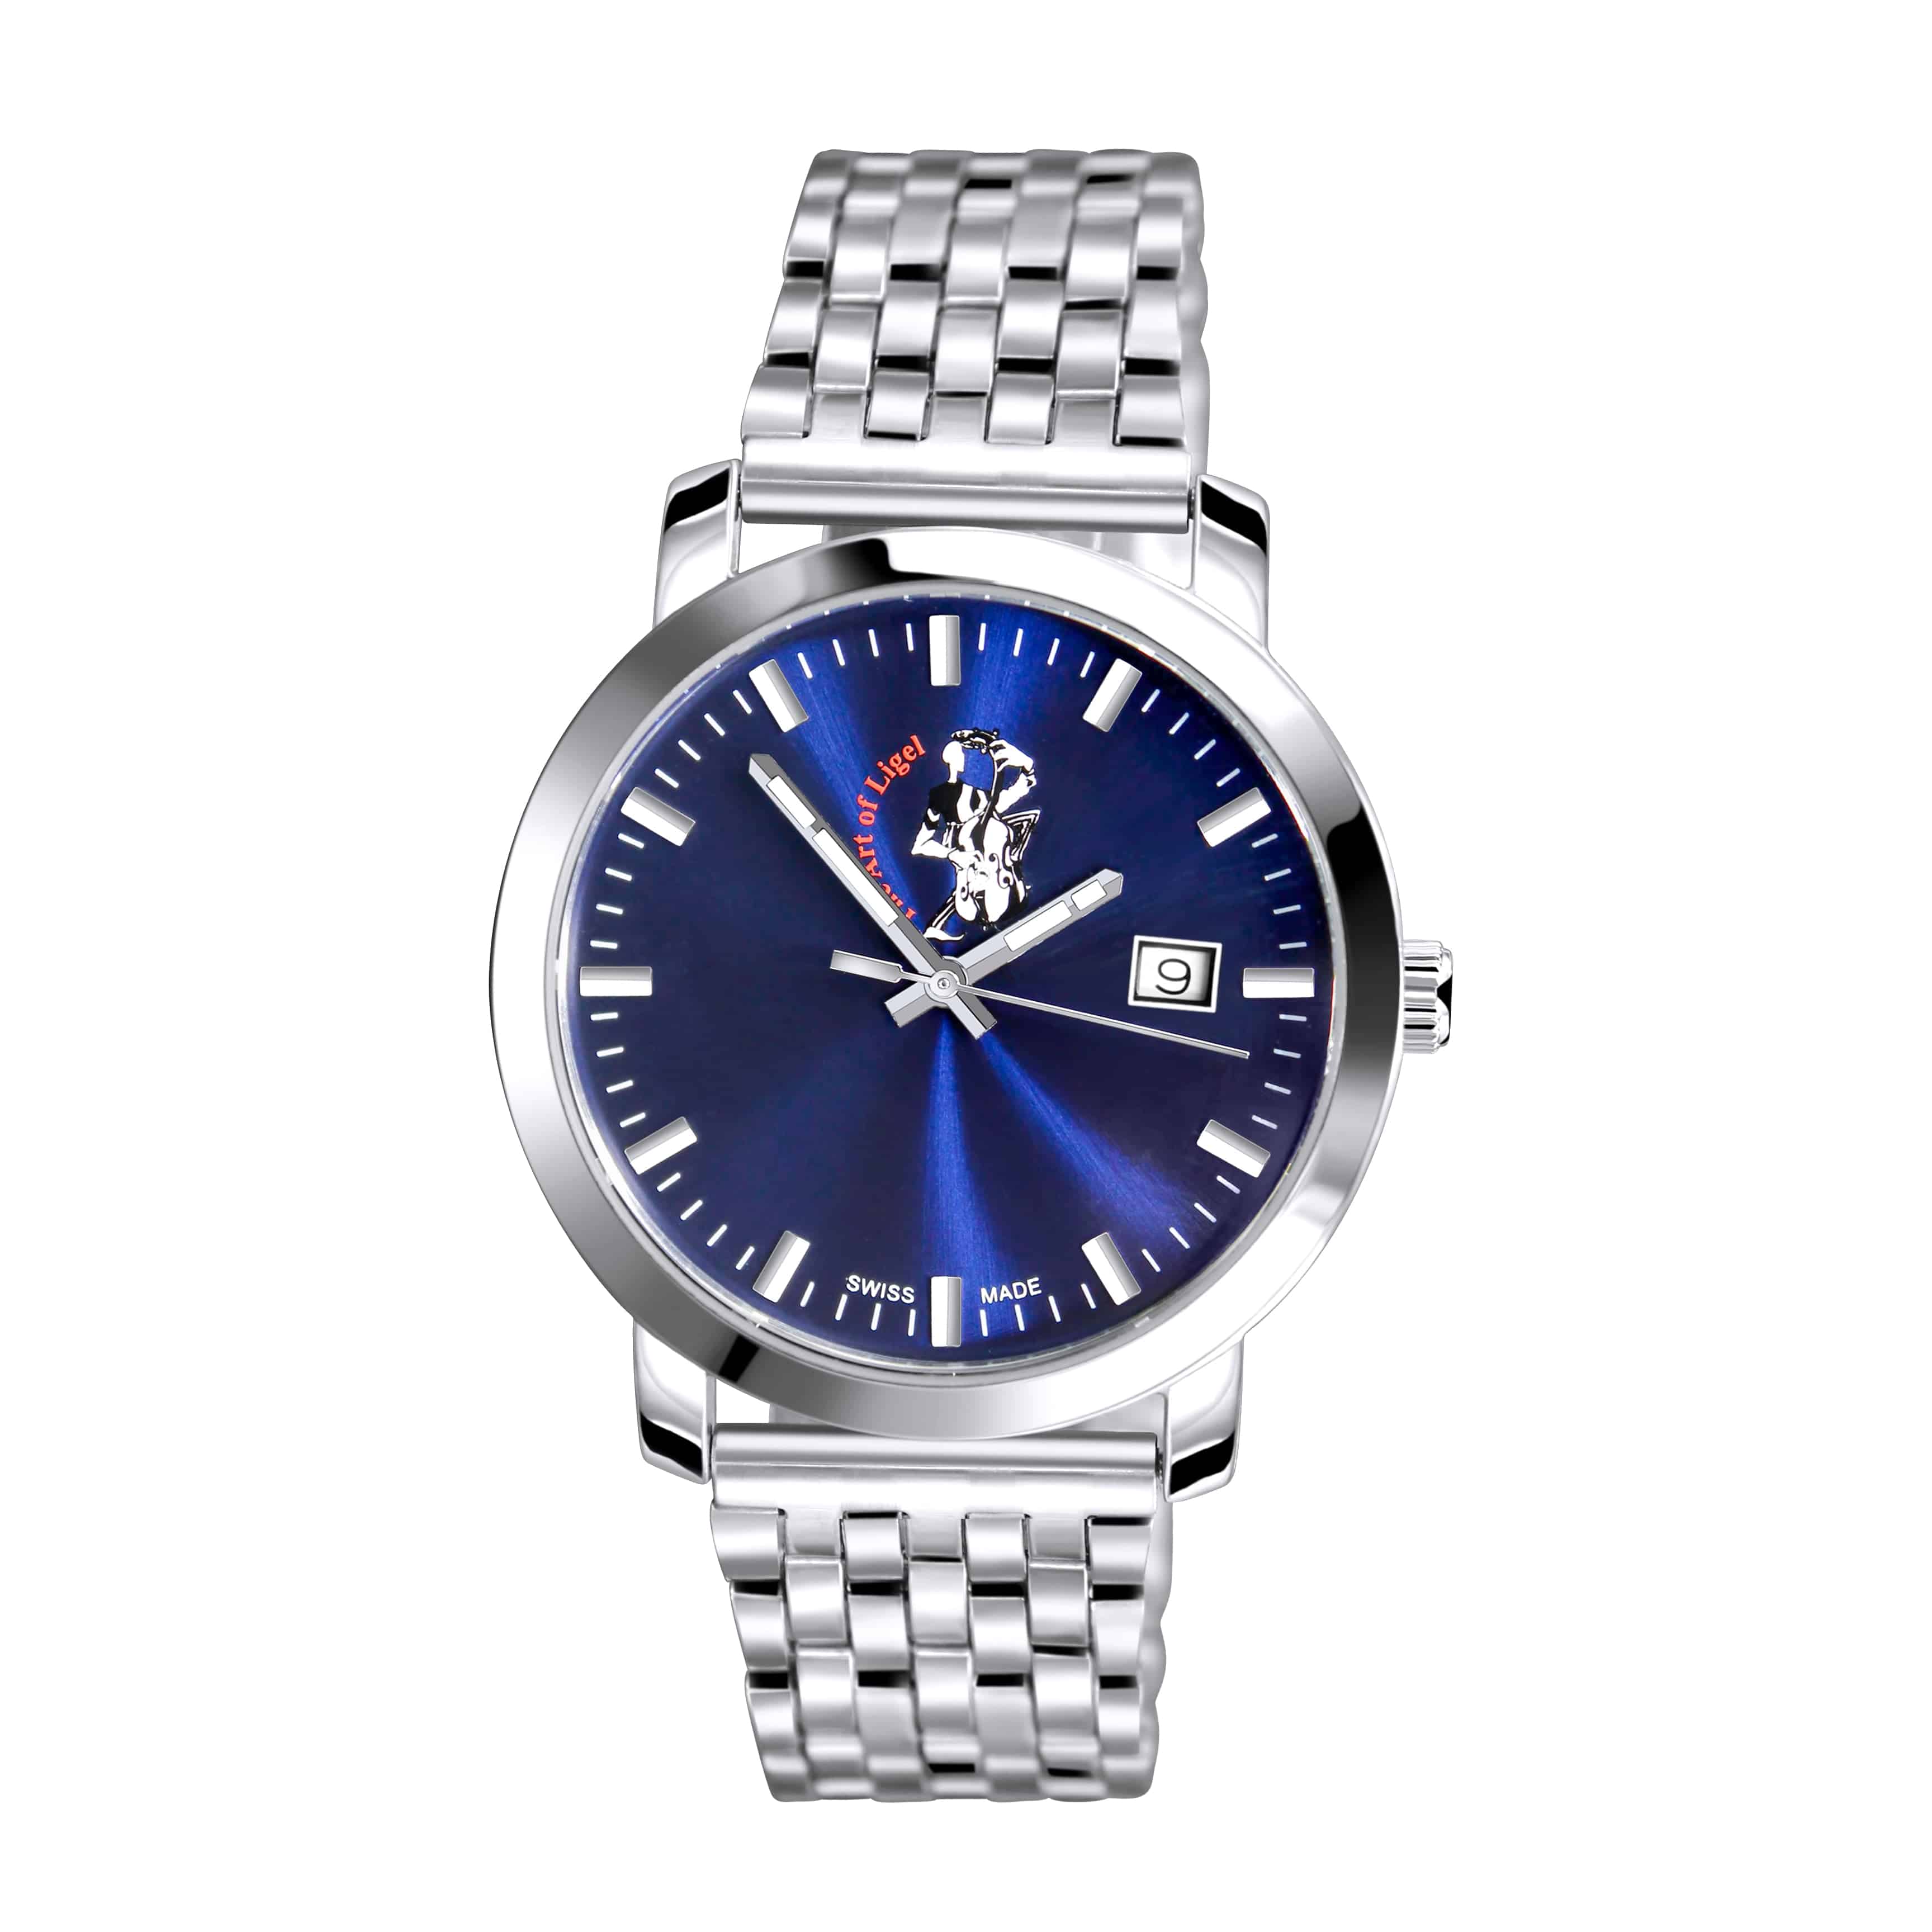 TAL WATCHES - Classic Stainless Steel Blue Dial | TAL WATCHES